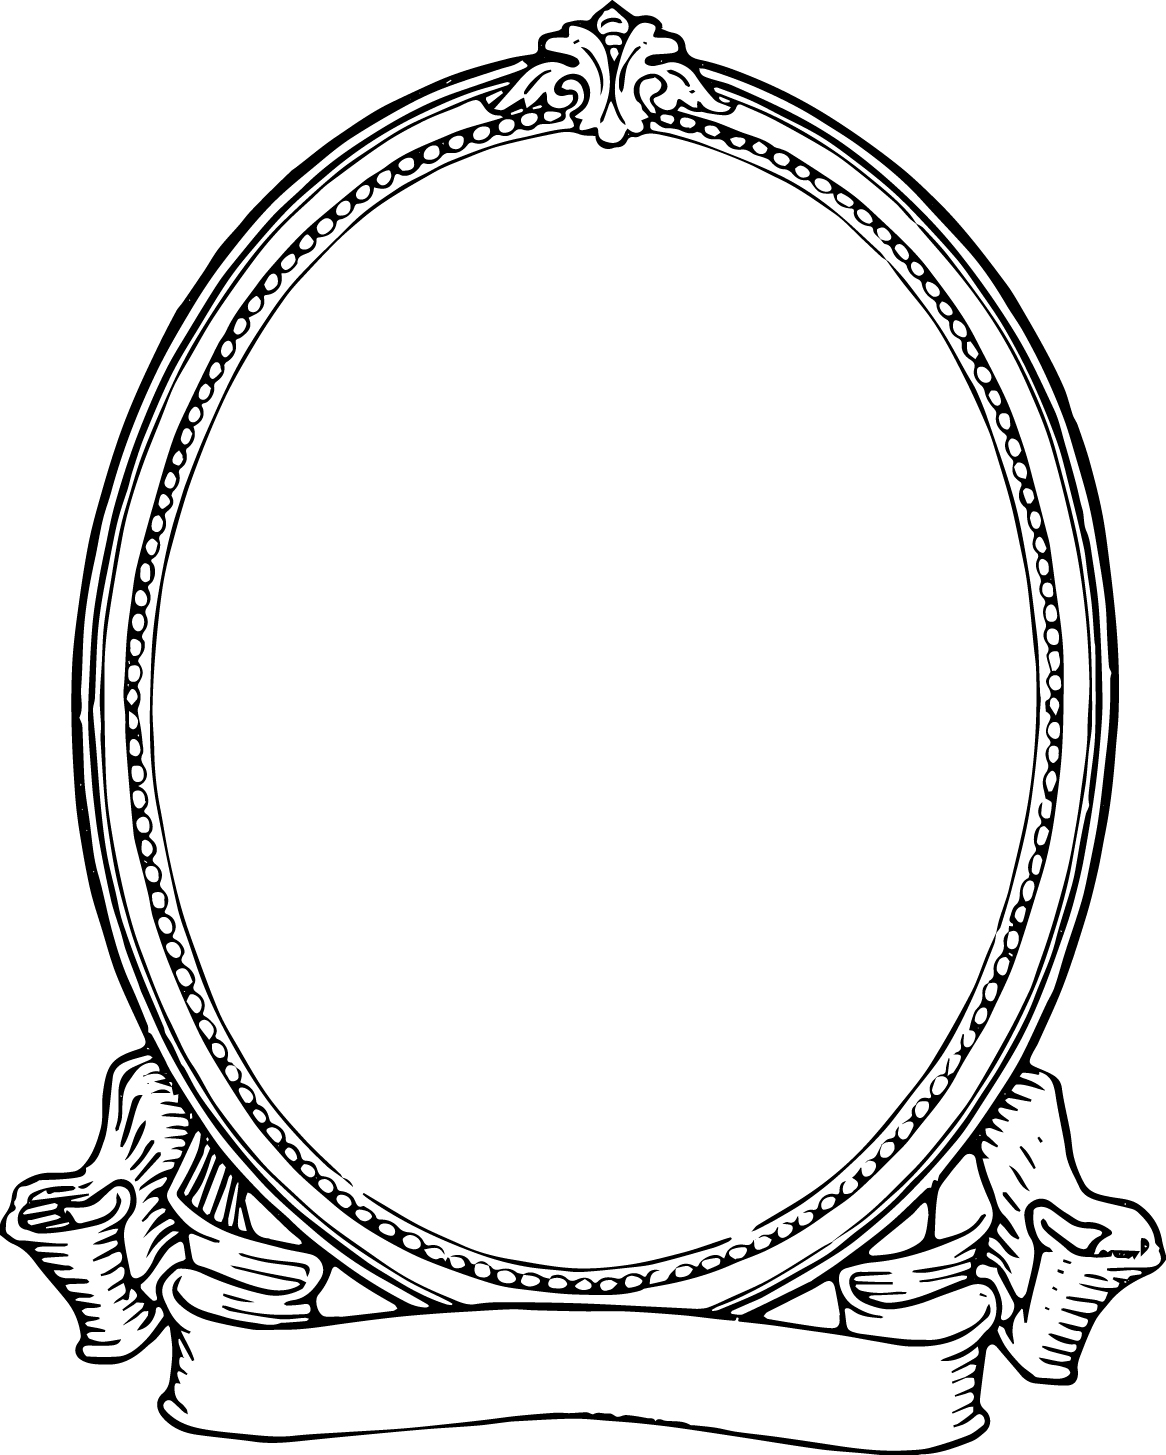 Free borders and frames clip art